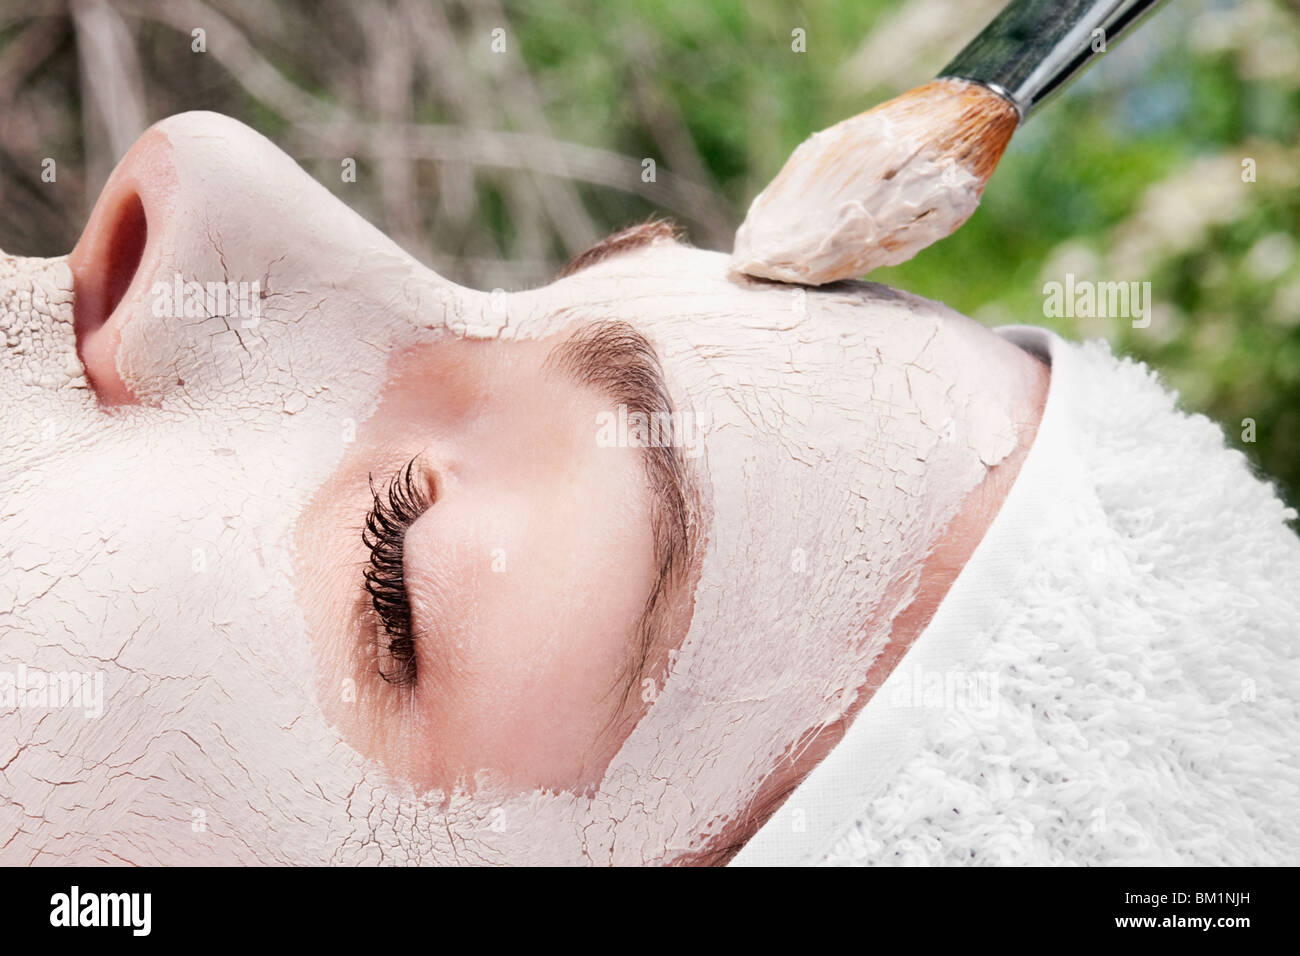 Woman applying face pack Stock Photo